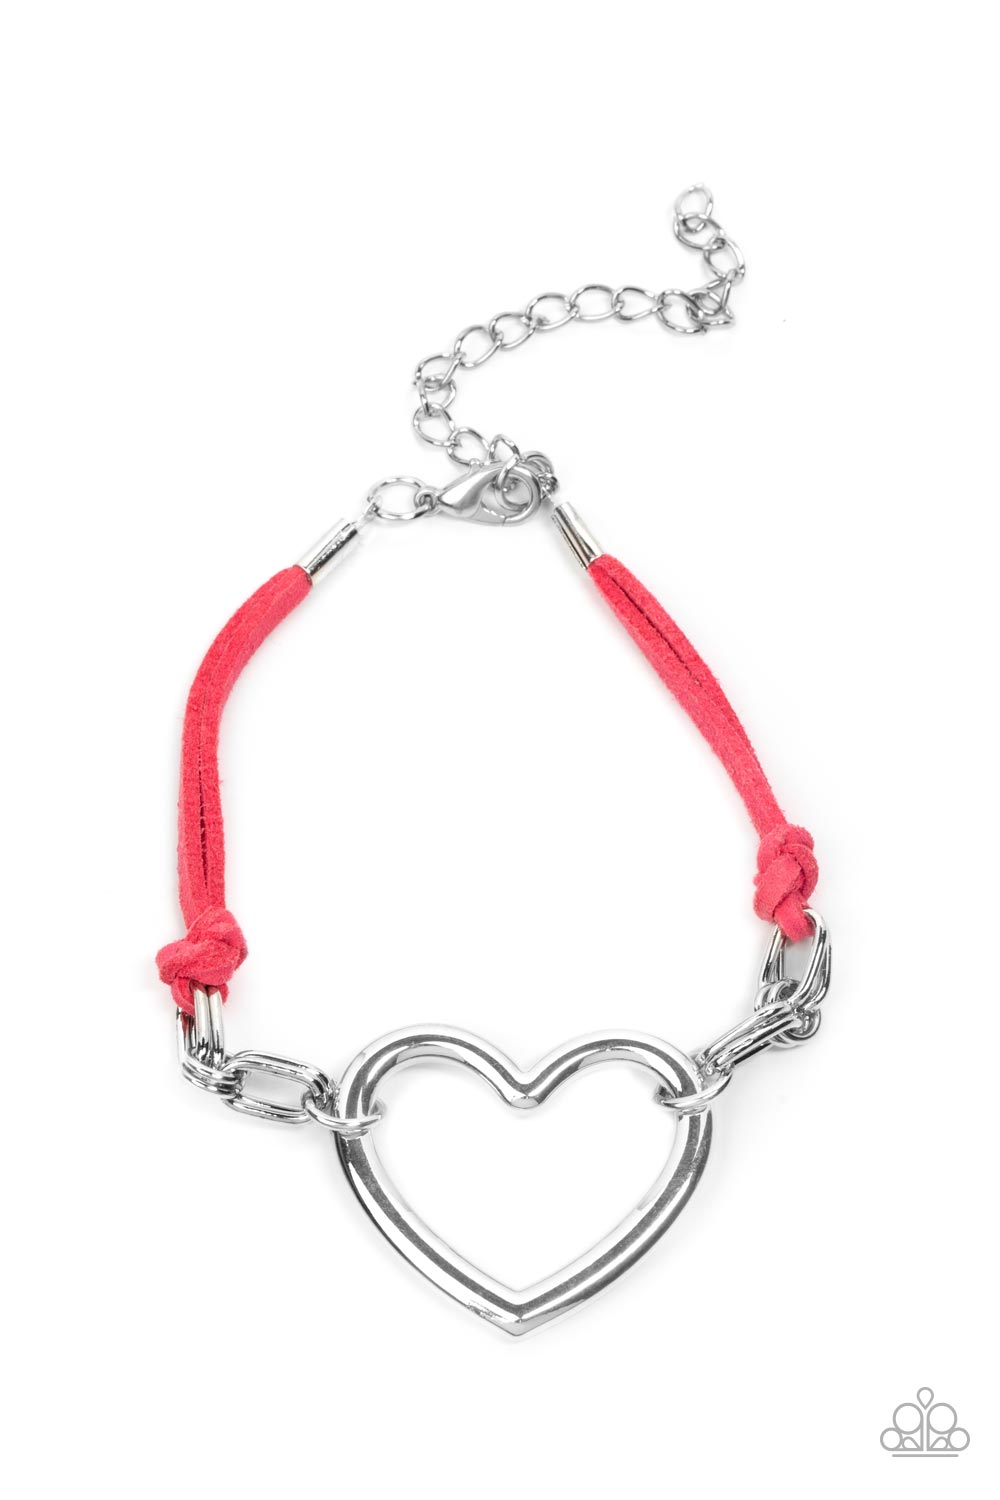 Flirty Flavour Pink Bracelet - Paparazzi Accessories  Strands of pink suede knot around sections of chunky silver chains that have been adorned in an oversized silver heart frame, resulting in a flirtatious display around the wrist. Features an adjustable clasp closure.  Sold as one individual bracelet.  Get The Complete Look! Necklace: "Fashionable Flirt - Pink" (Sold Separately)